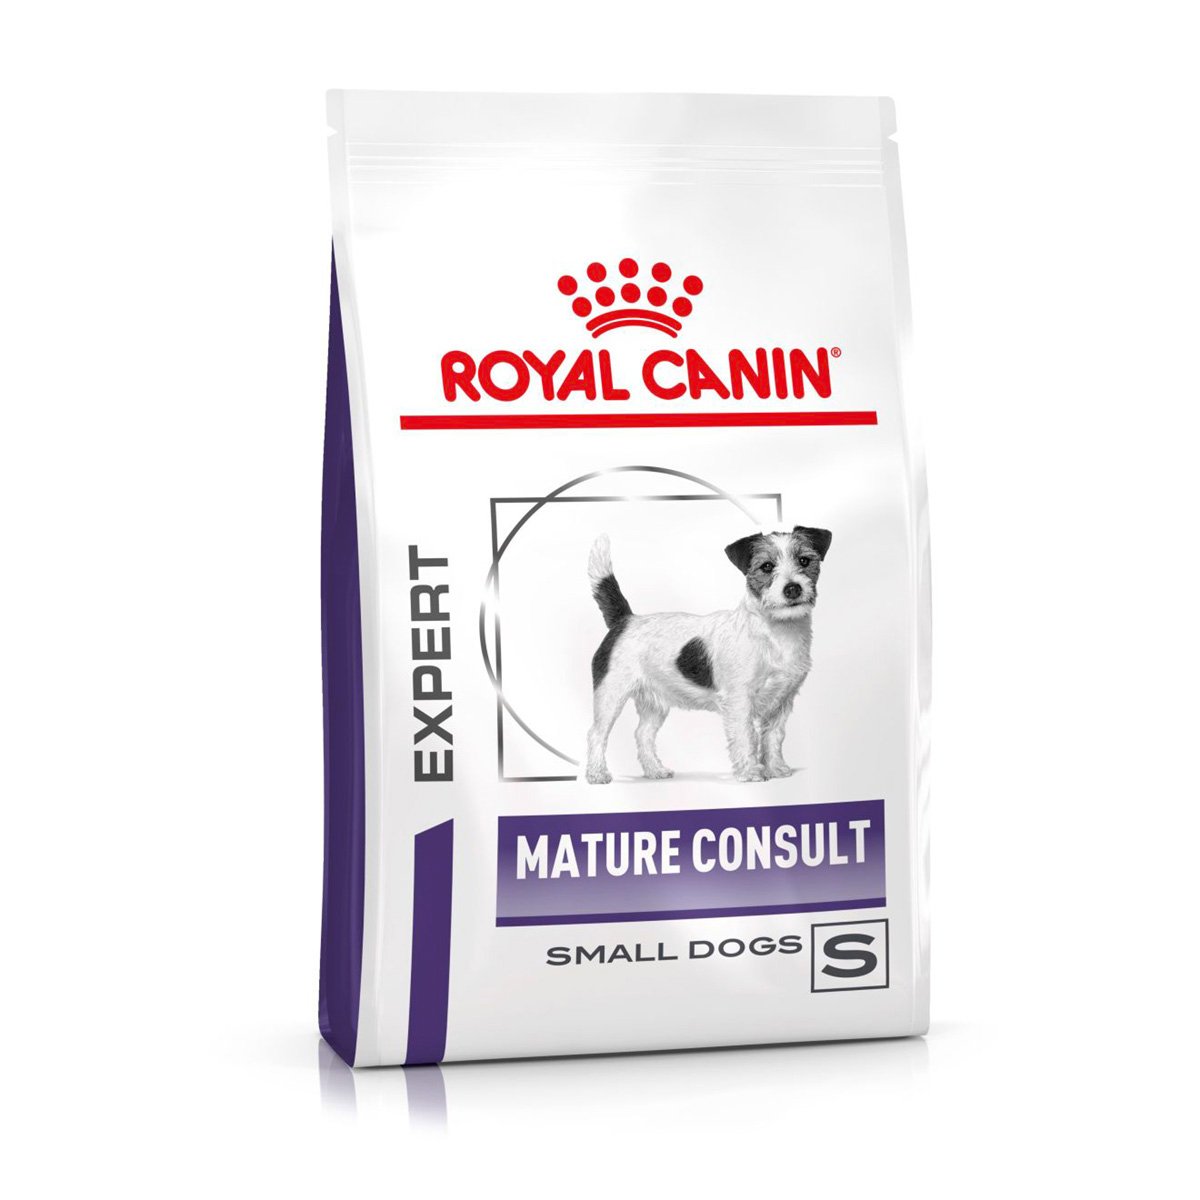 ROYAL CANIN® Expert MATURE CONSULT SMALL DOGS Trockenfutter für Hunde 3,5kg von Royal Canin